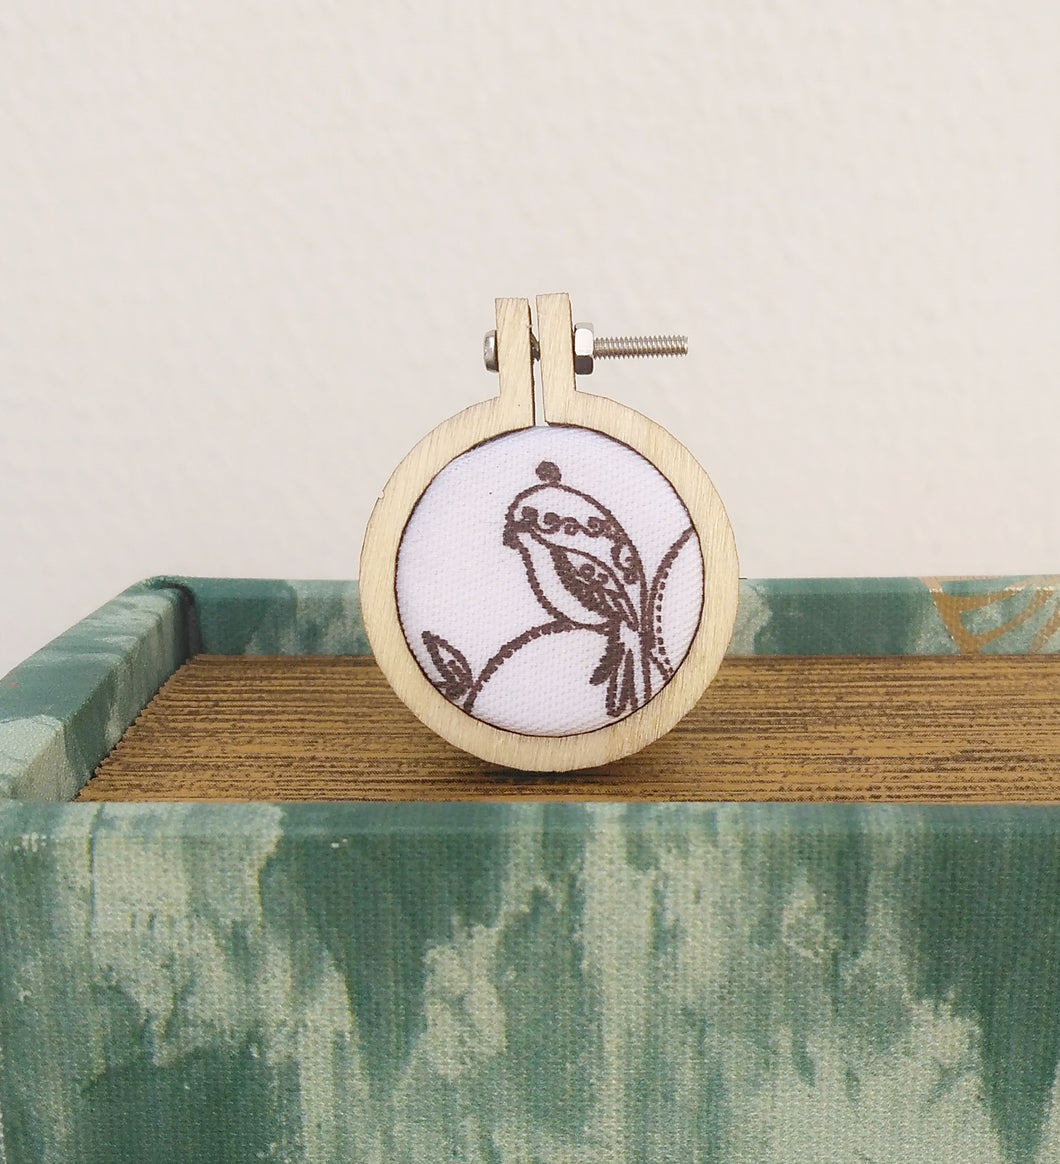 Embroidery Hoop Necklace Bird On Branch